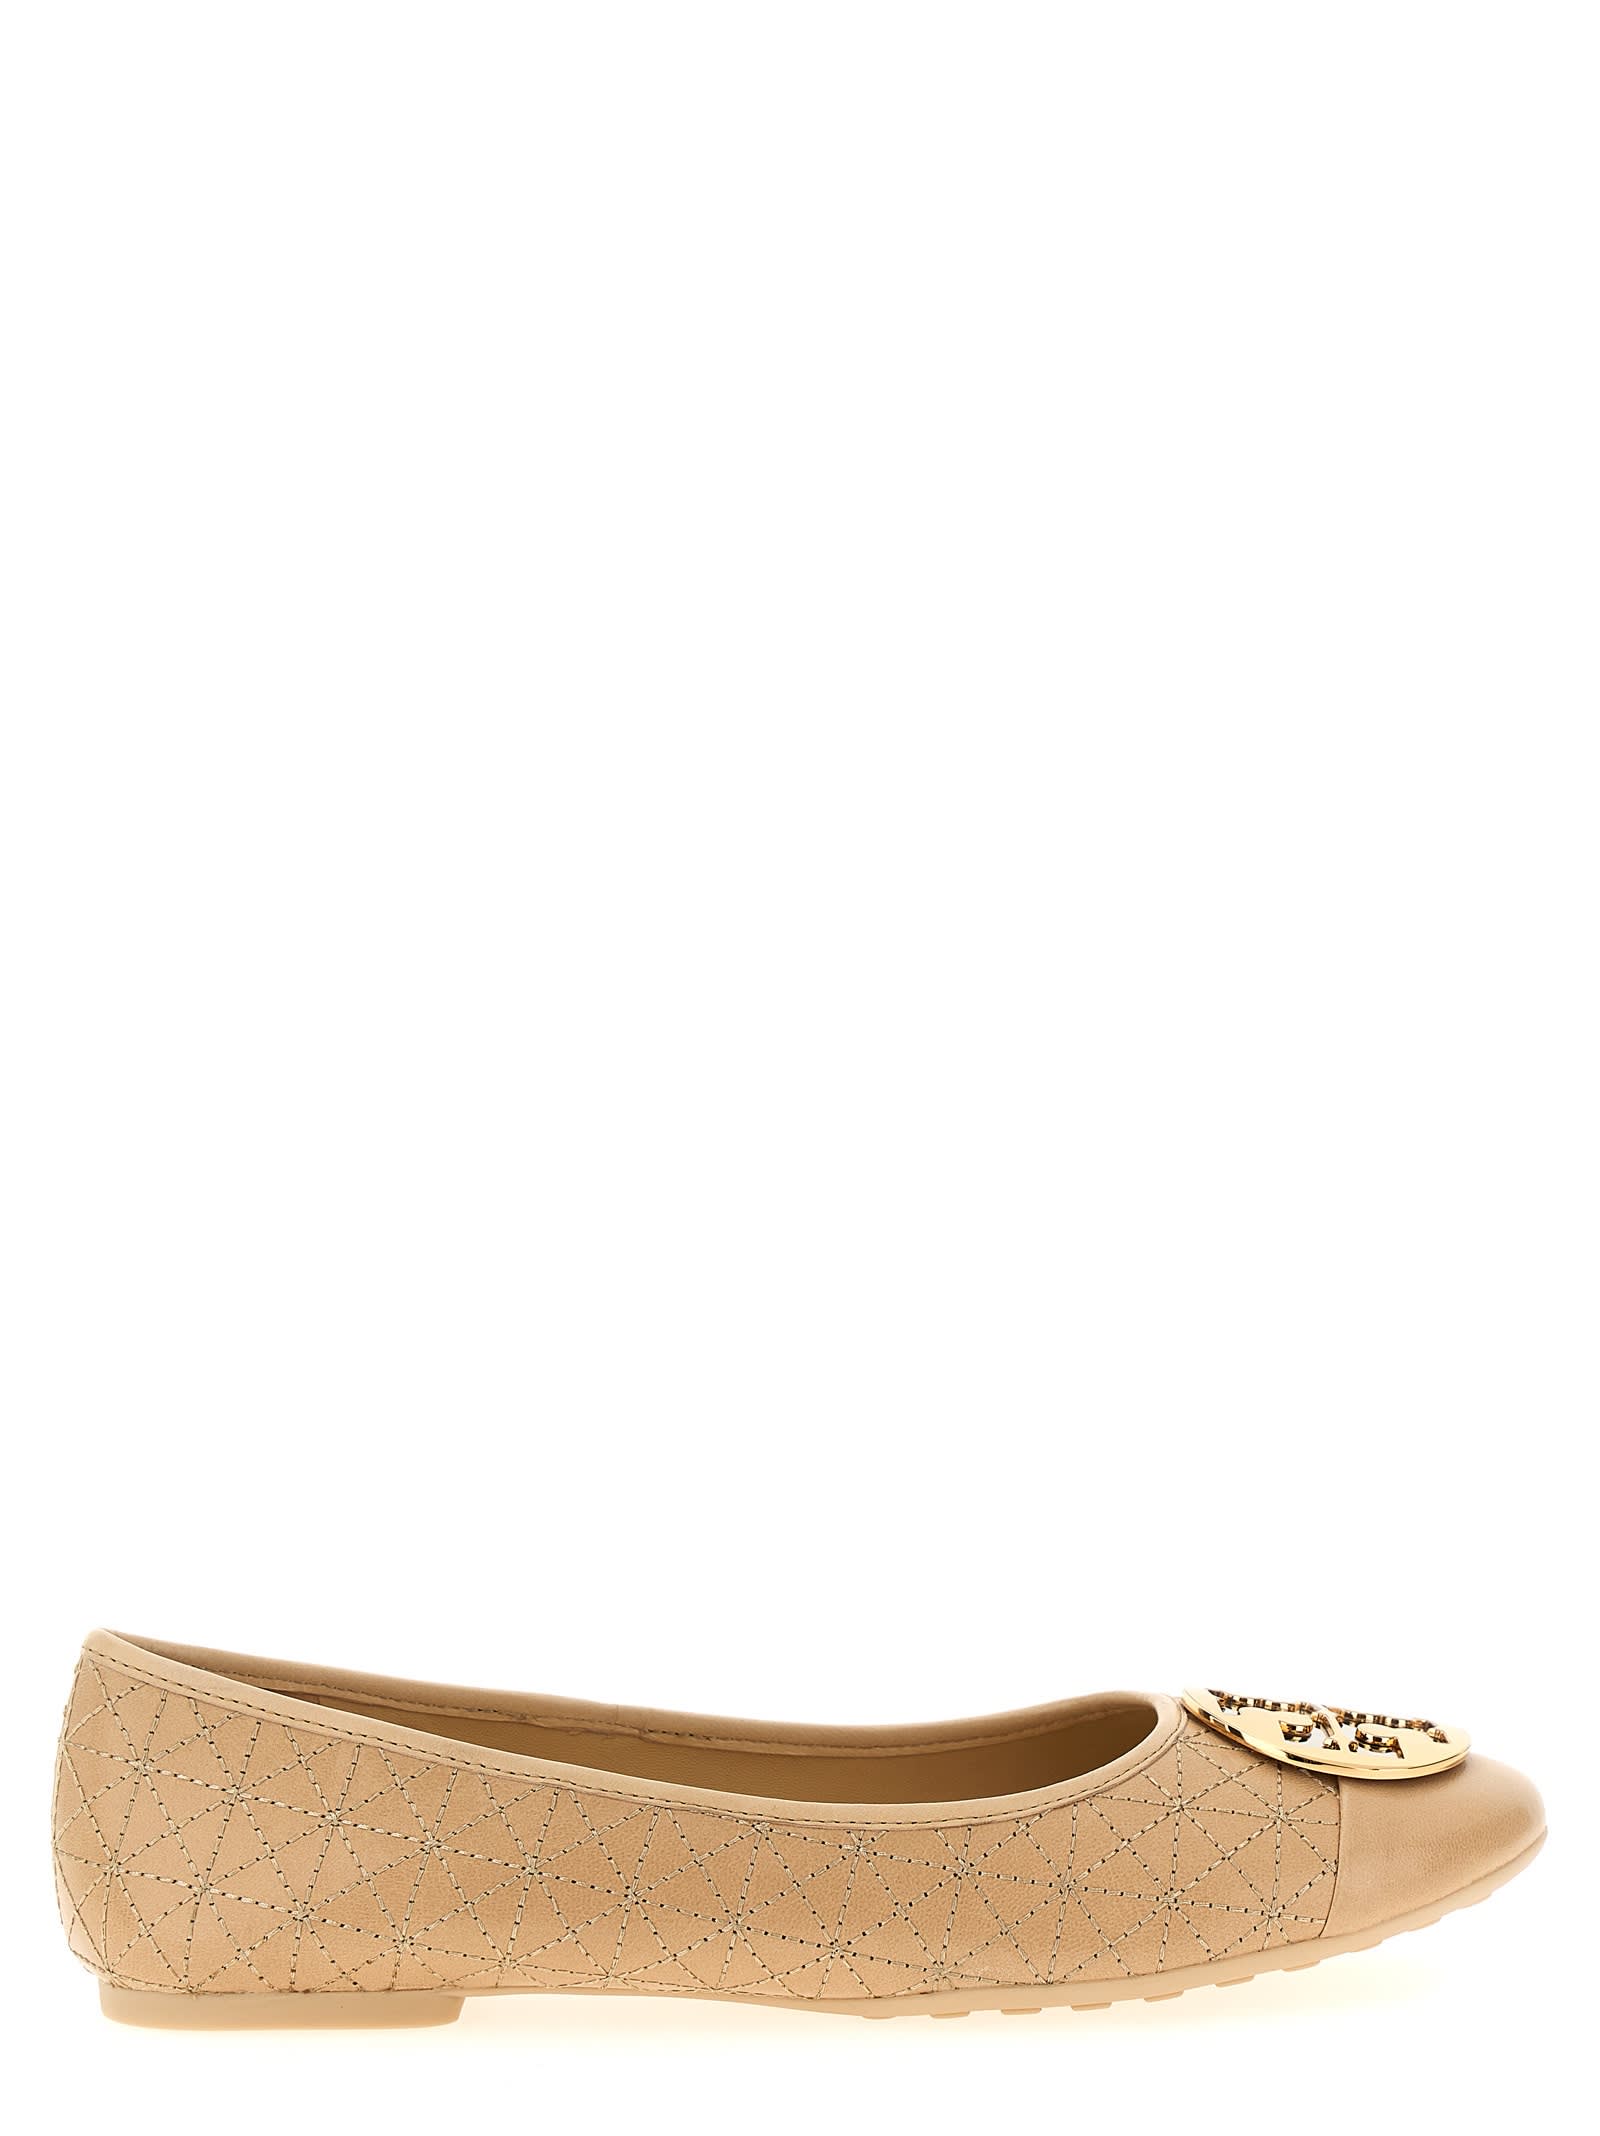 TORY BURCH CLAIRE QUILTED BALLET FLATS